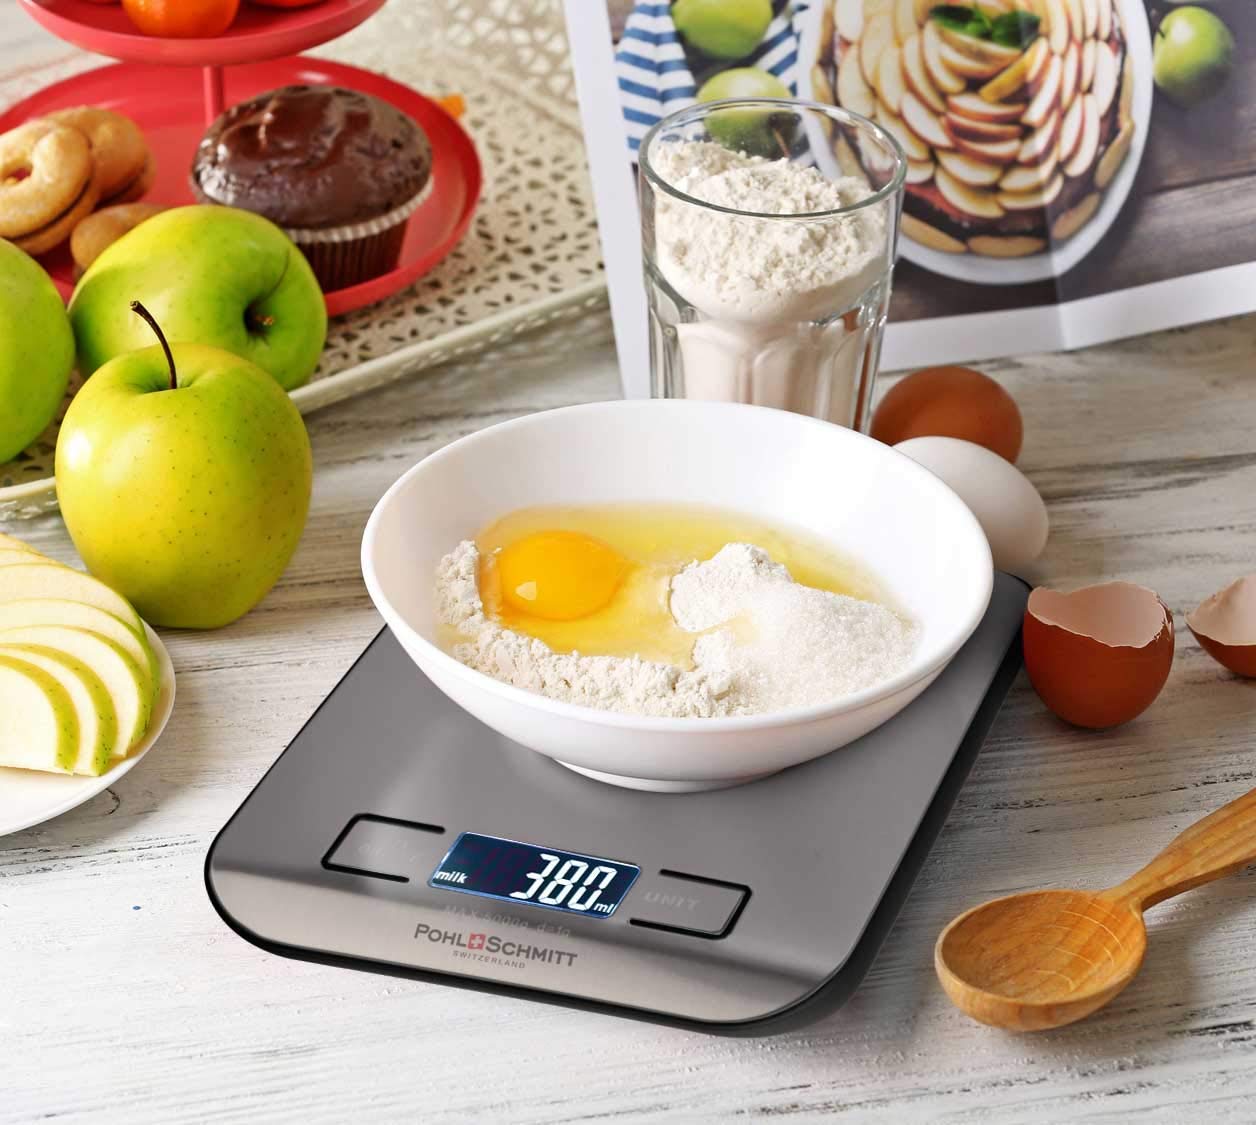 A kitchen scale on a table along with other things